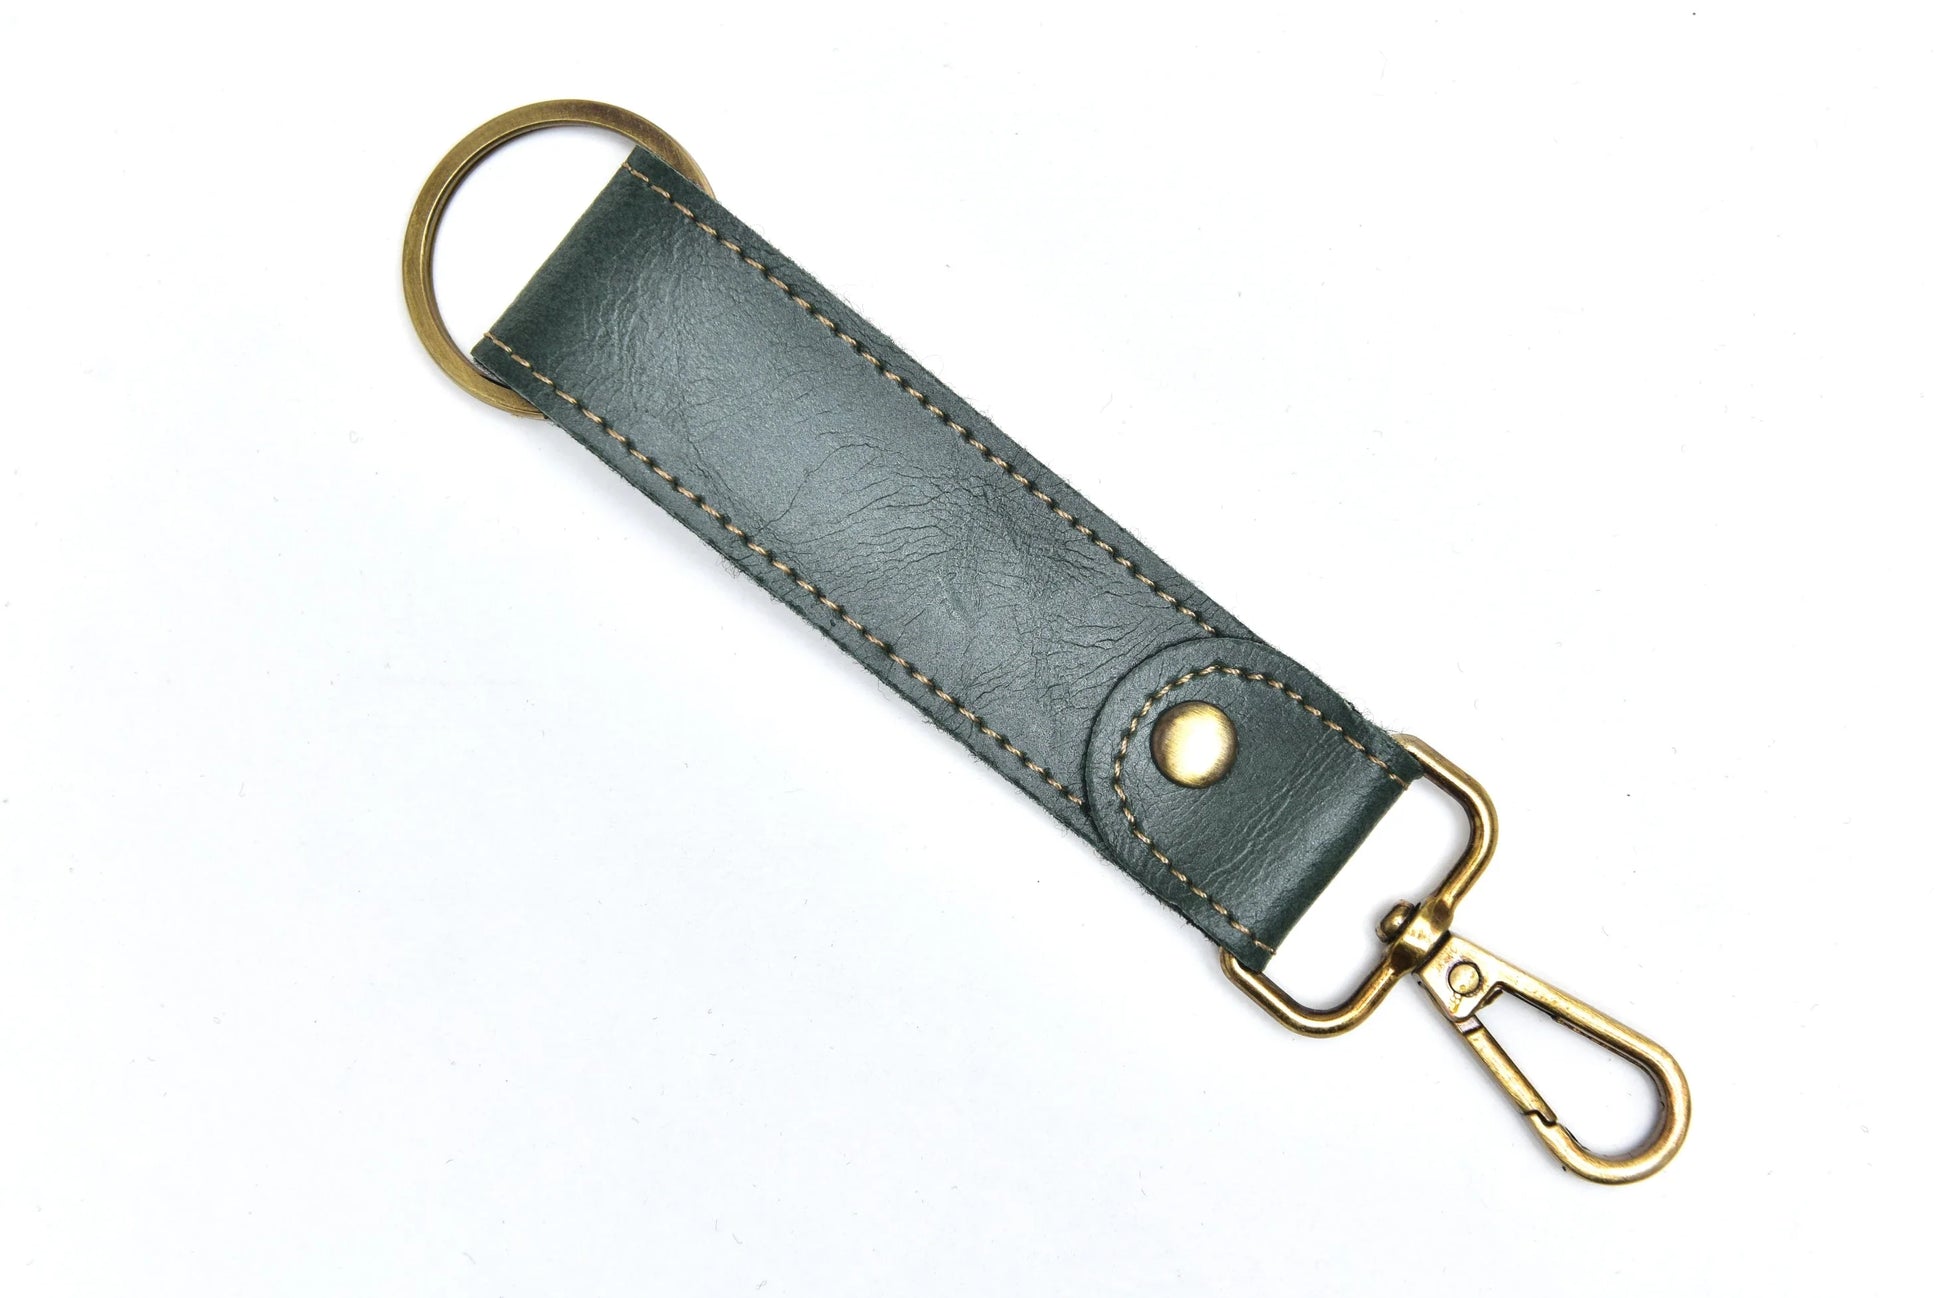  Why settle for a random keychain you are not 100% happy with when you can get your very own premium quality Custom leather Keychain! After all, it is the smallest of details that make you stand out in the crowd!